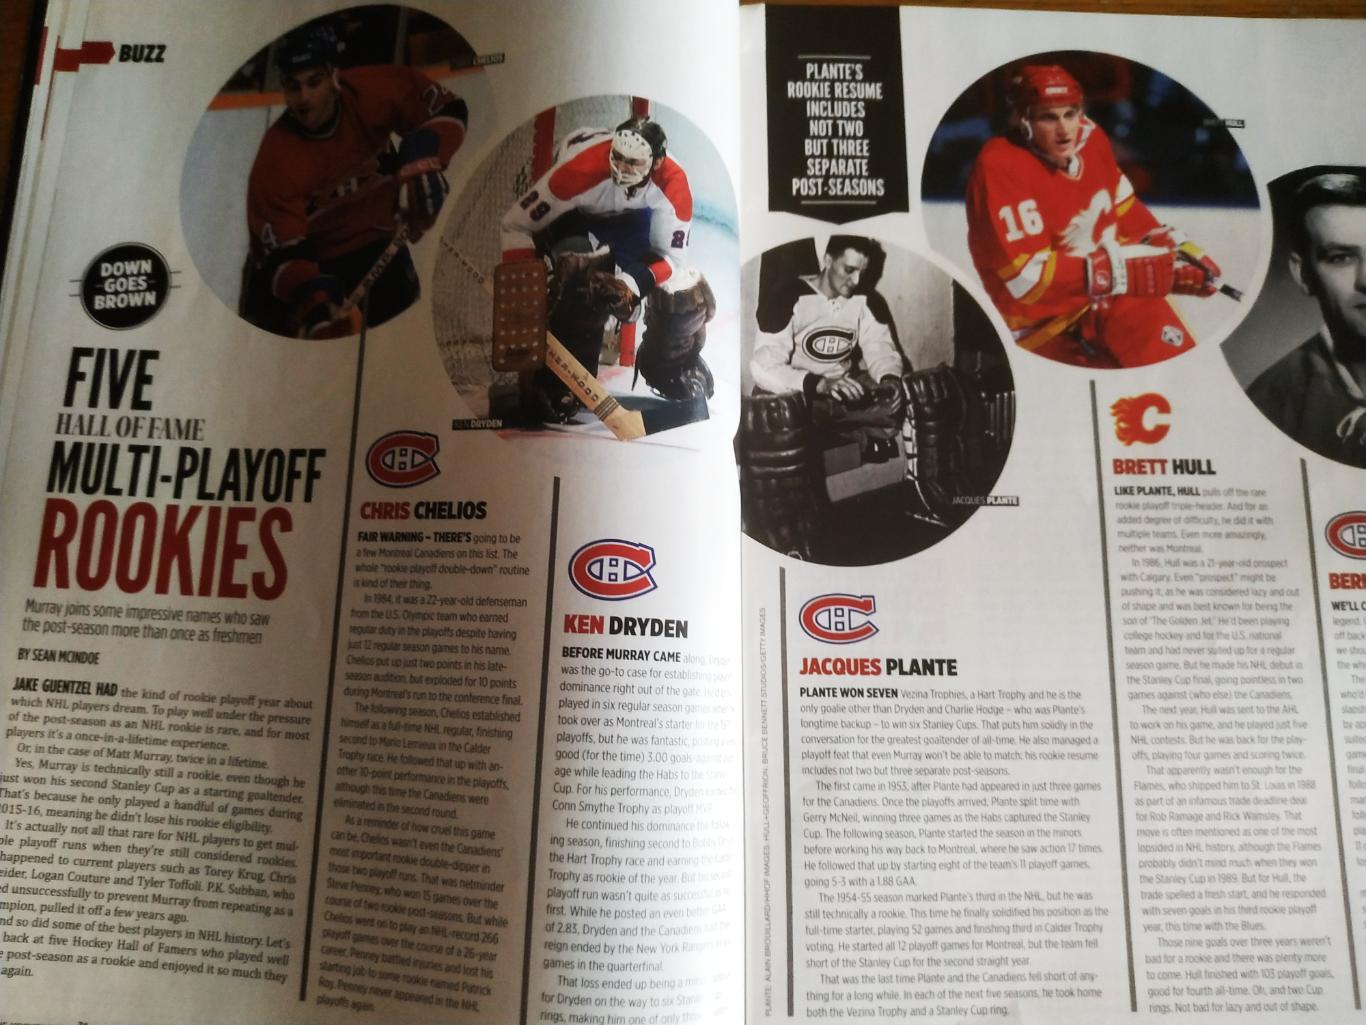 ЖУРНАЛ 2017 AUG 21 THE HOCKEY NEWS STANLEY CUP CHAMPIONS HISTORY IS MADE 2